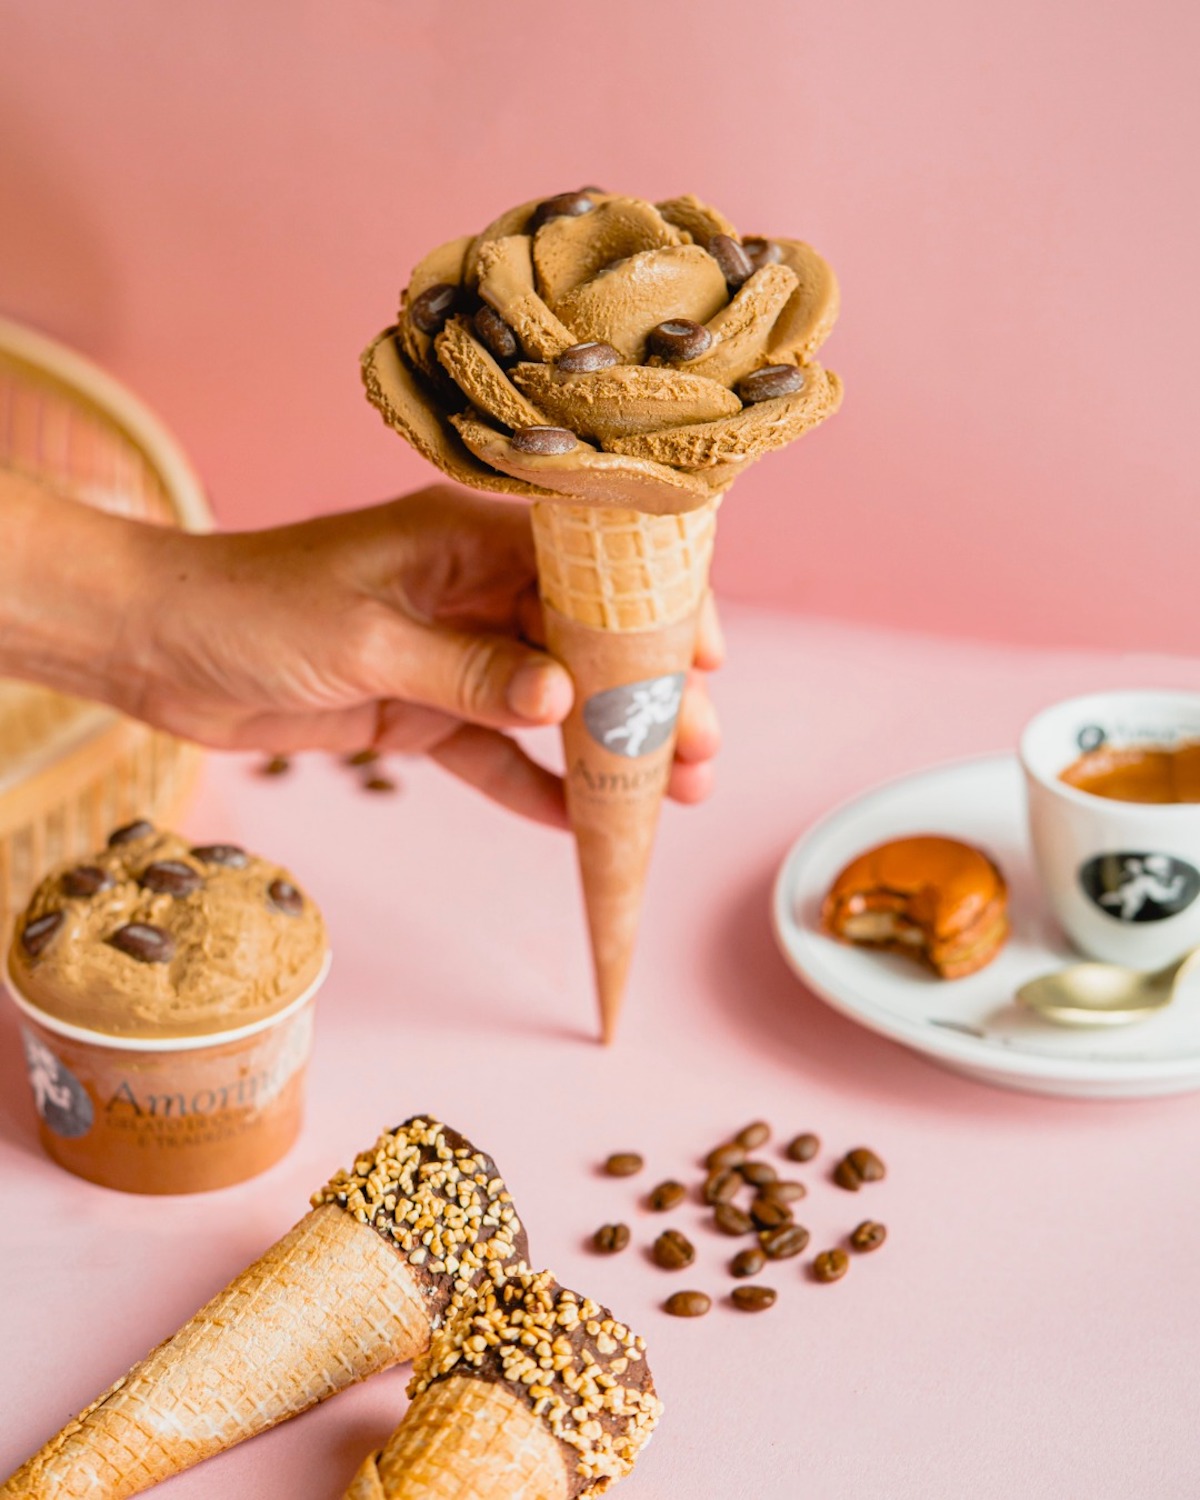 Gelato Brand Amorino Opening Founders Hall Outpost